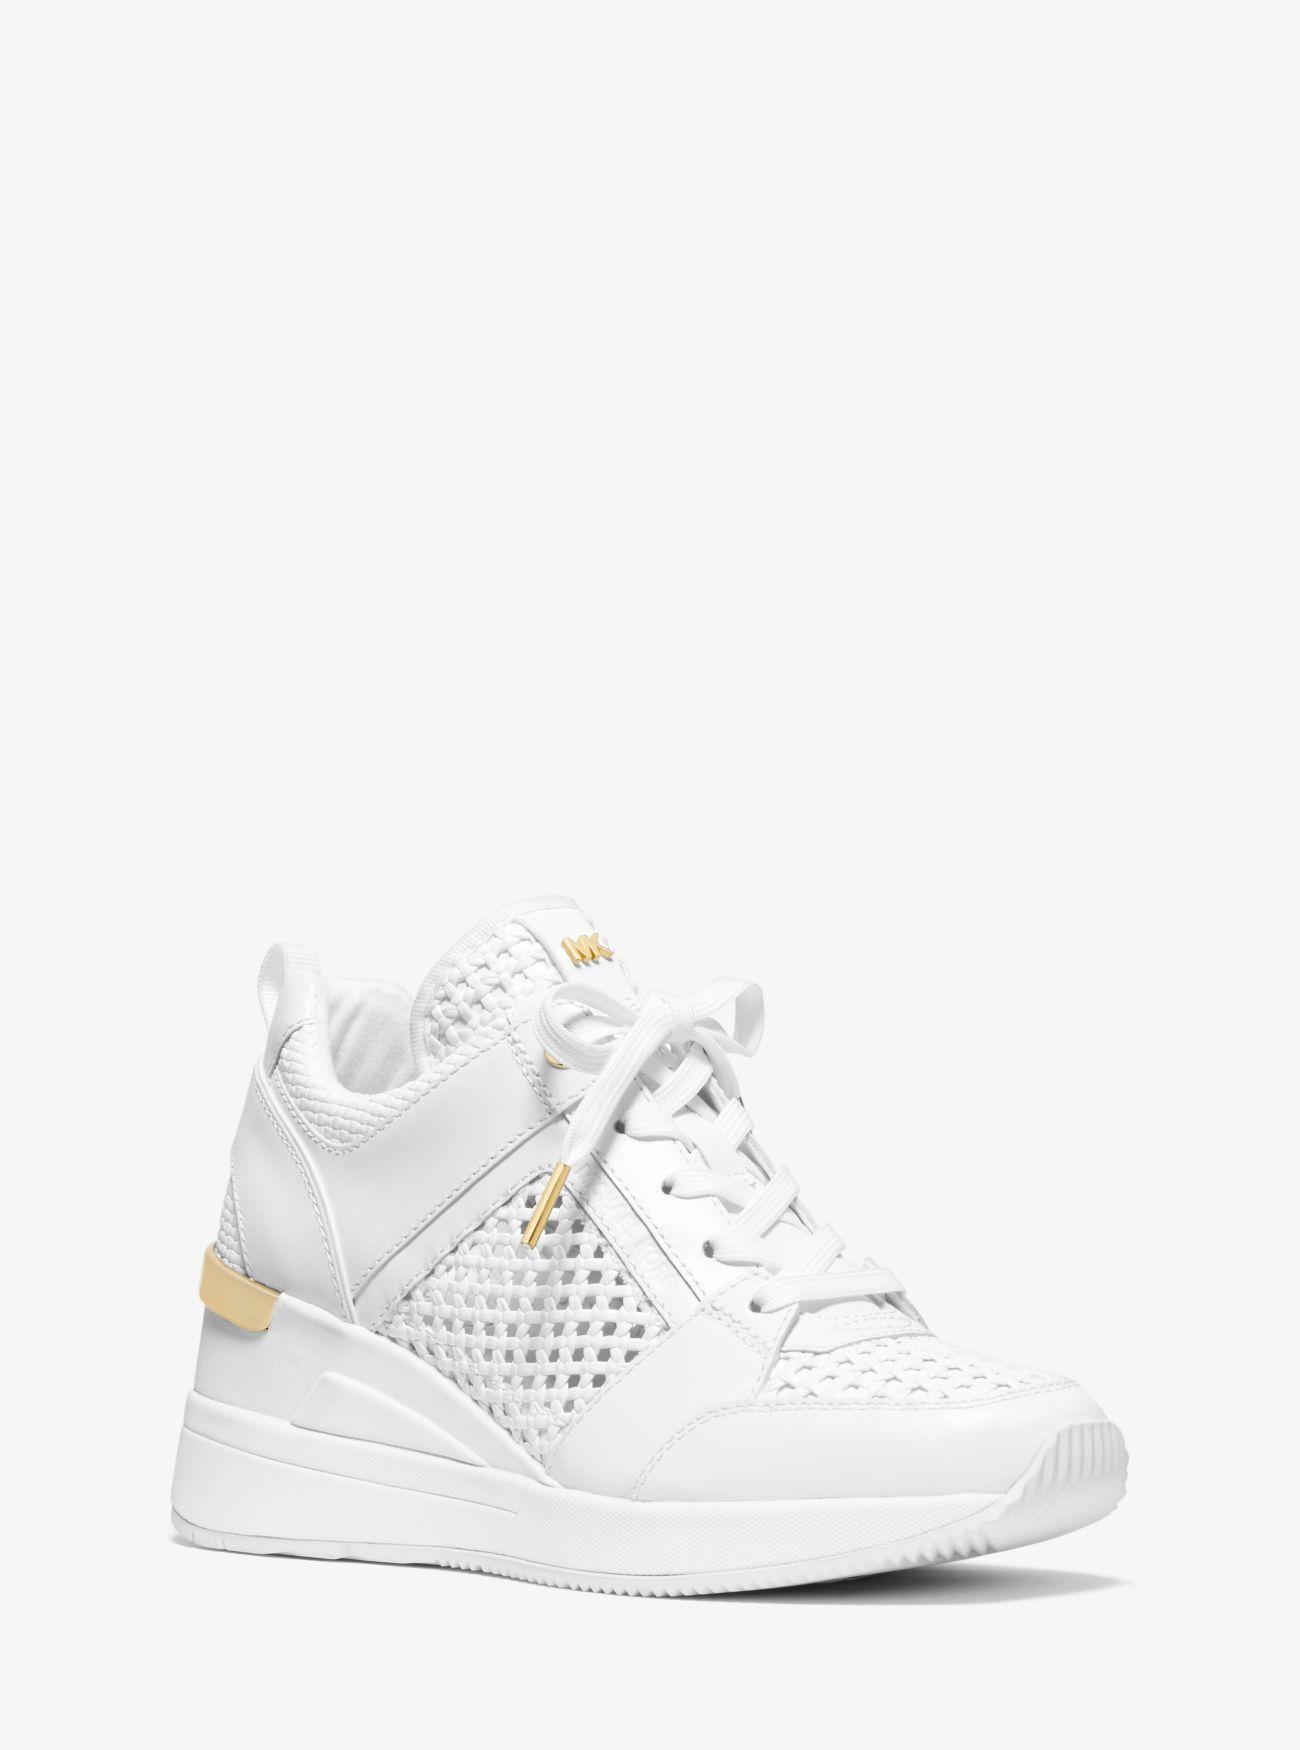 Michael Kors Georgie Woven Leather Trainer in White | Lyst